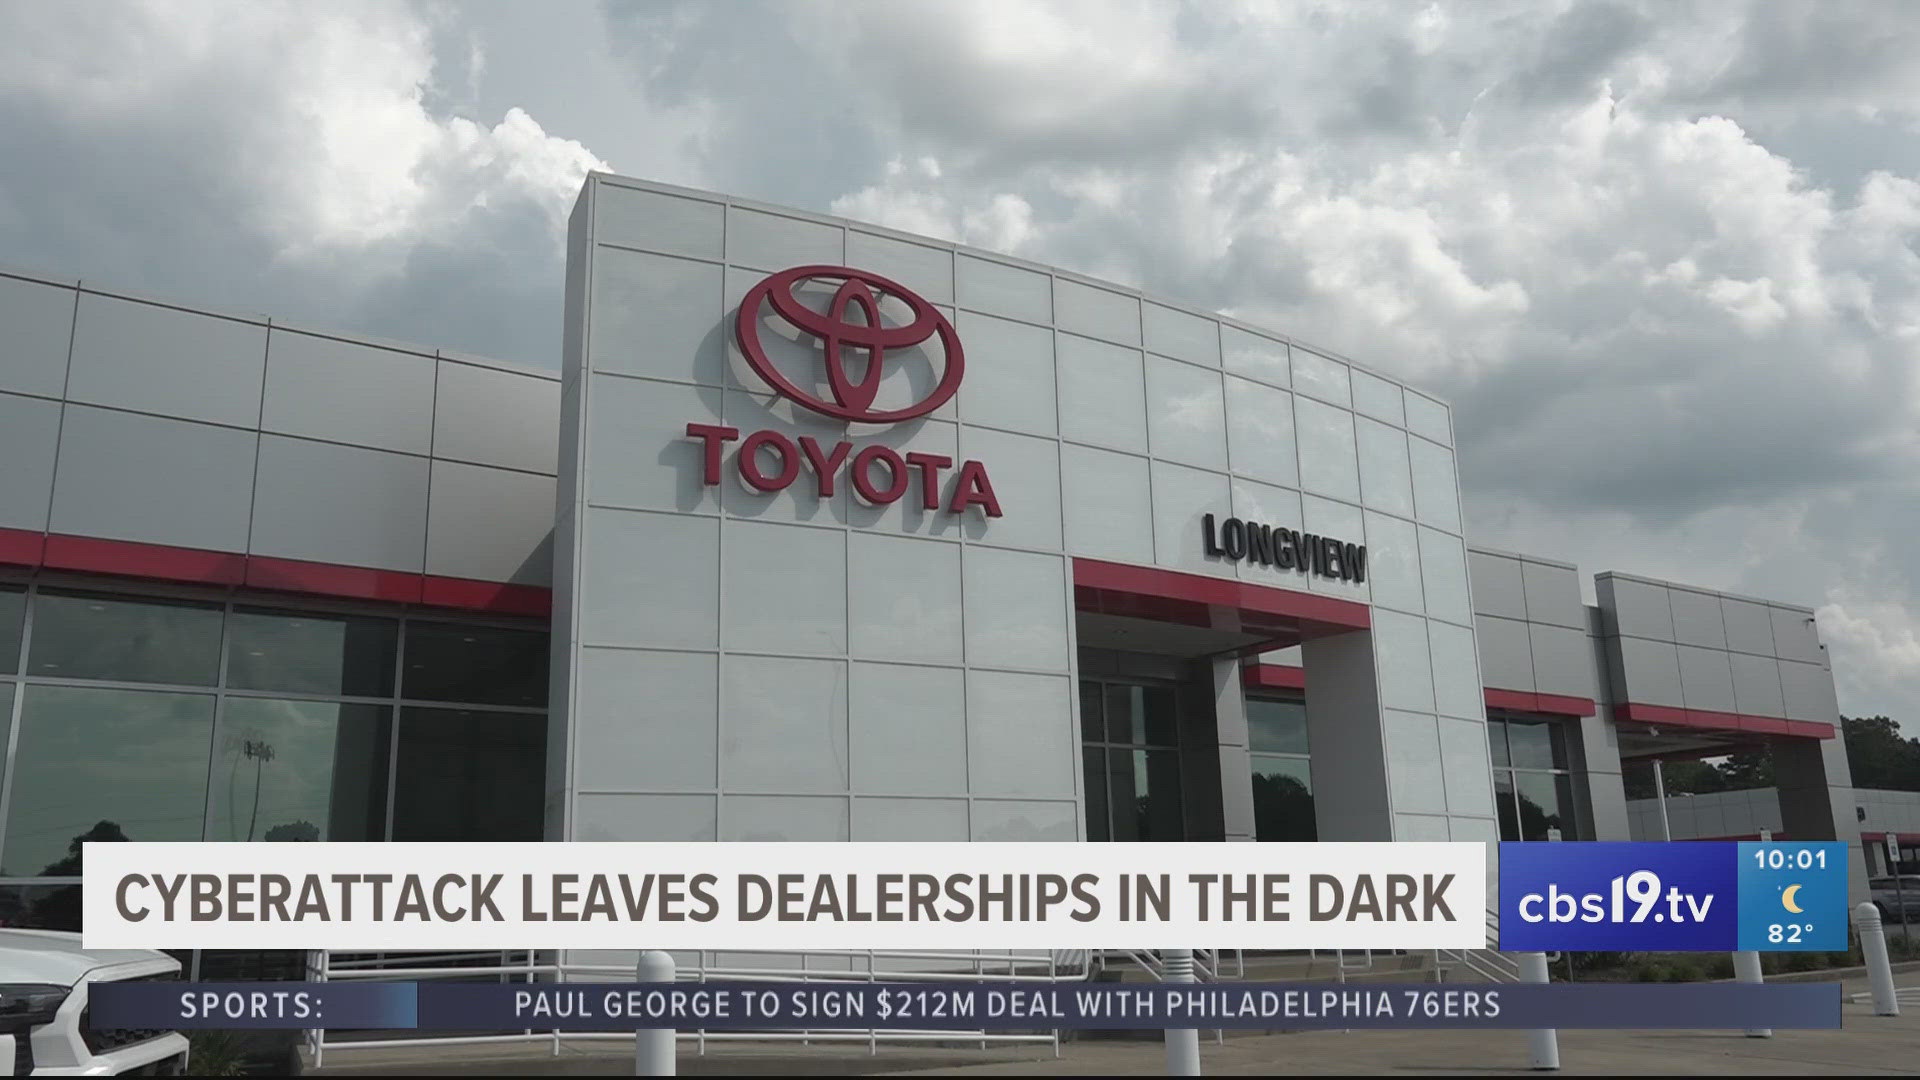 East Texas car dealership feels impact of nationwide software cyberattack